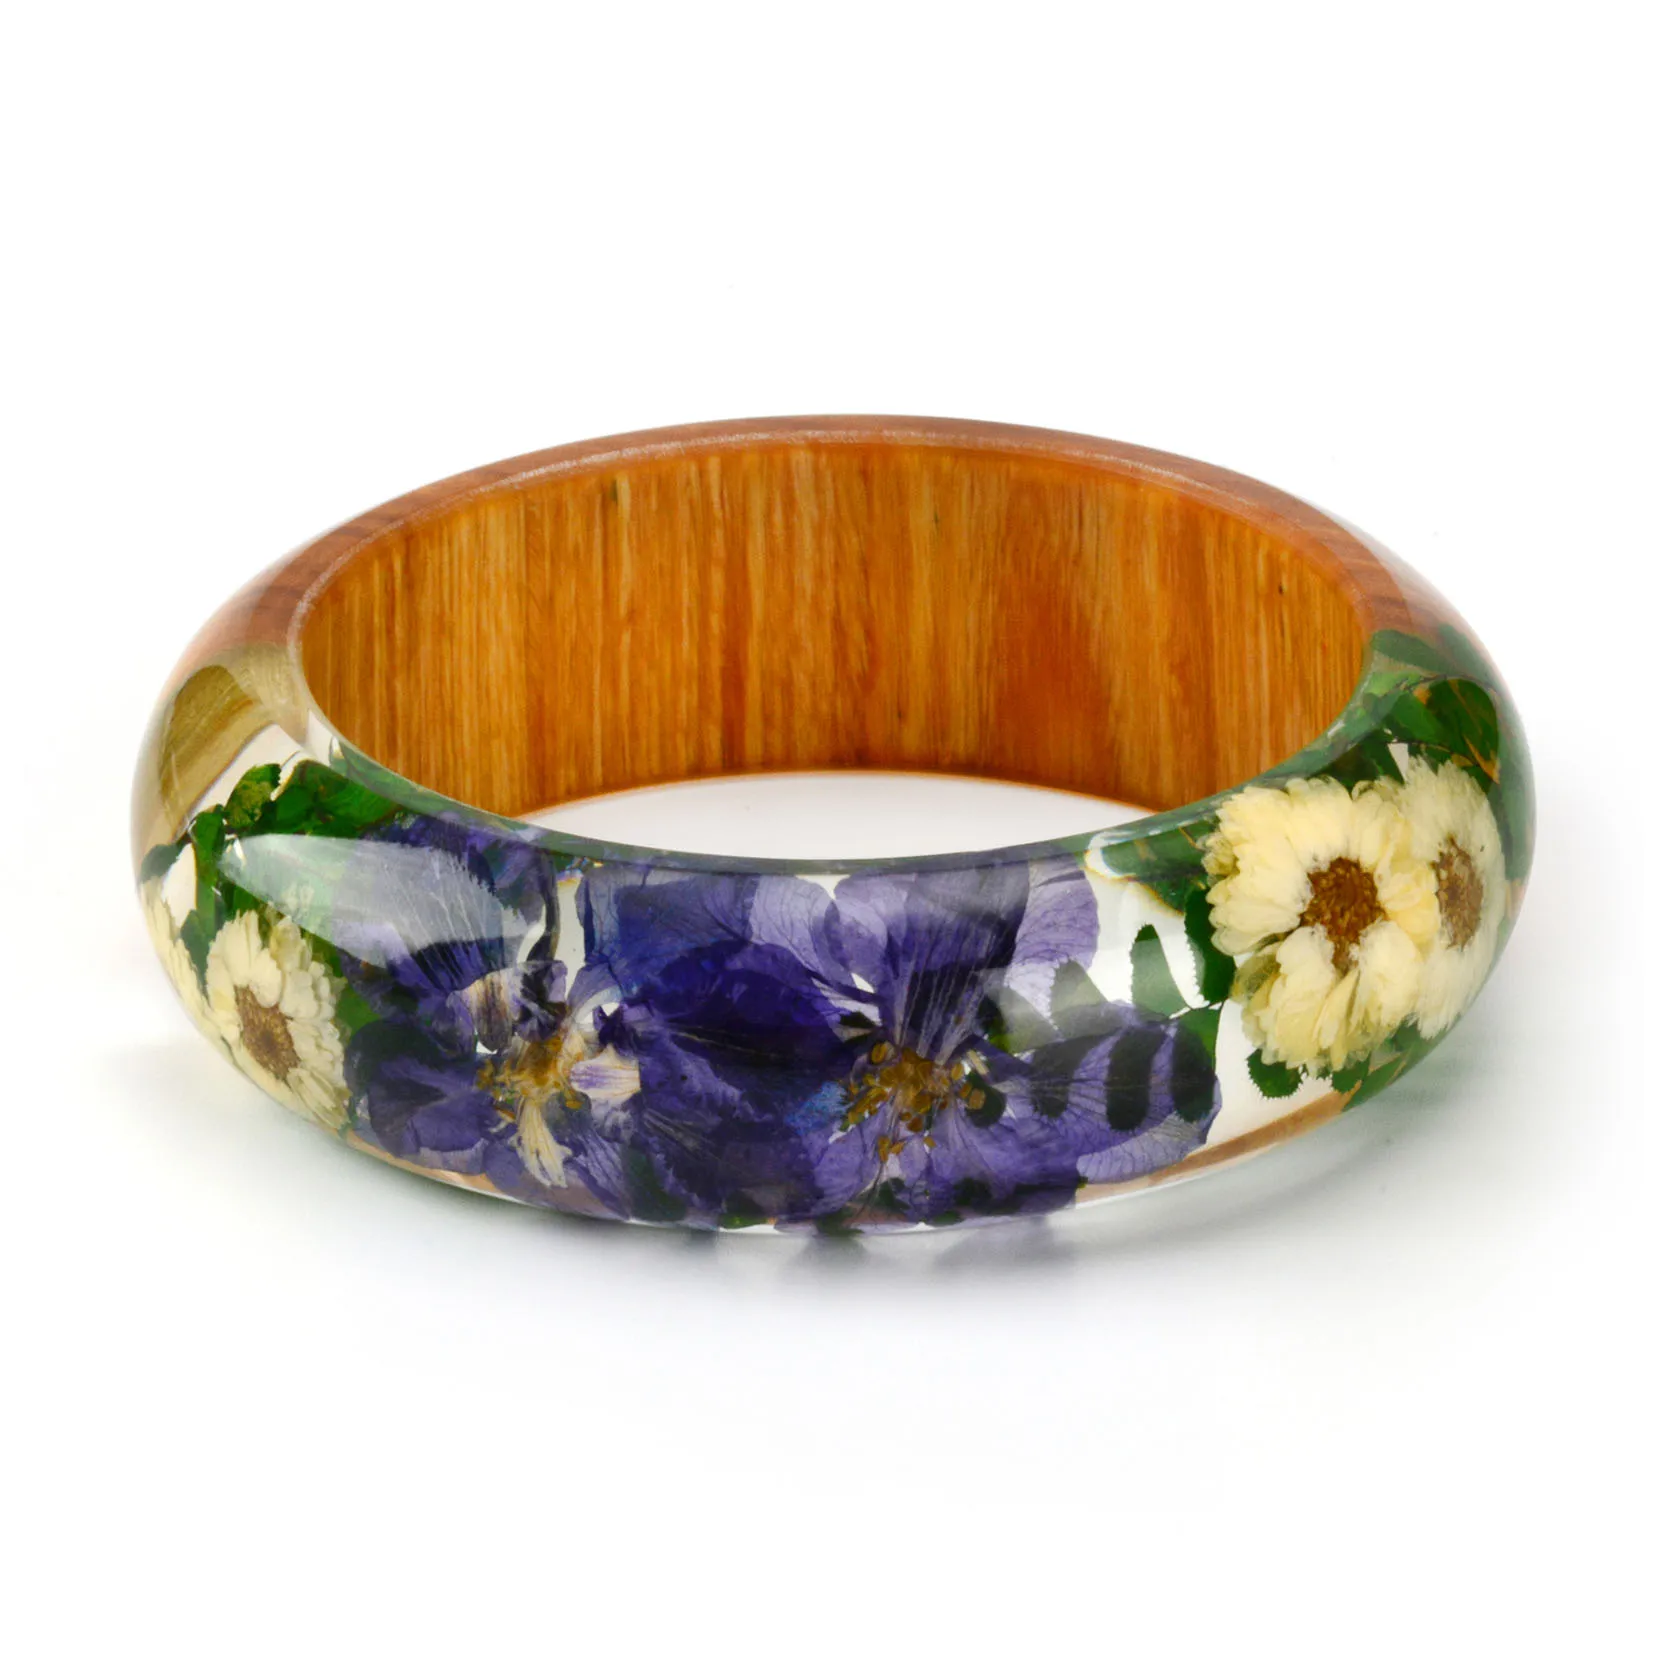 2018 New Handmade Resin Bangle Bracelet Mixed Dried Flower Purple Pink Green Leaf Bohemia Style Jewelry for Christmas Gift